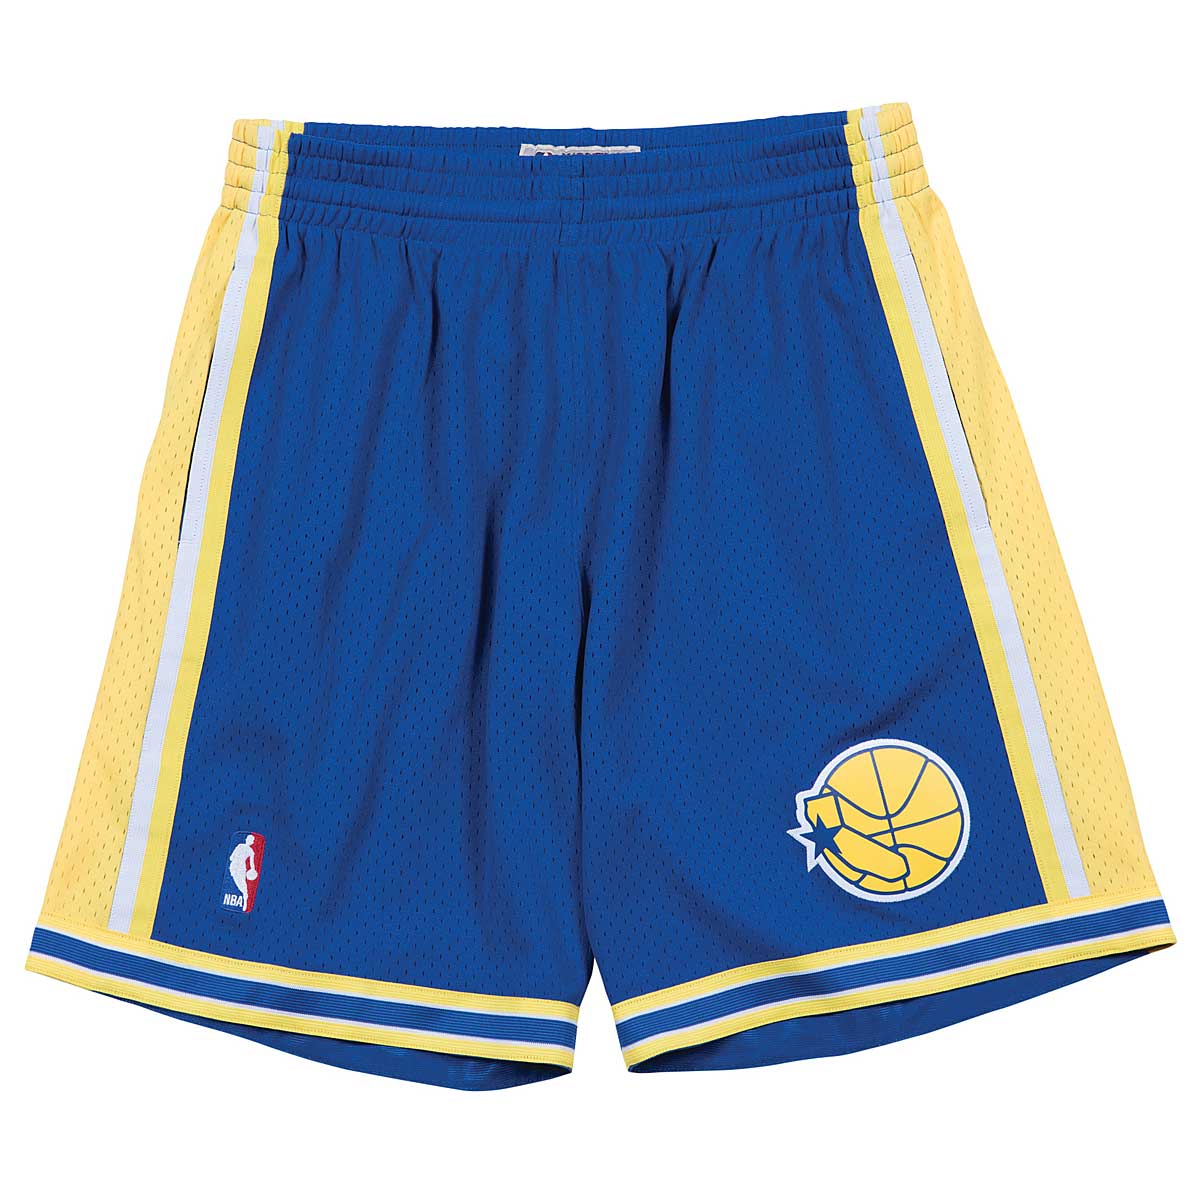 Mitchell And Ness Nba Swingman Shorts Golden State Warriors, Royal Blue/White